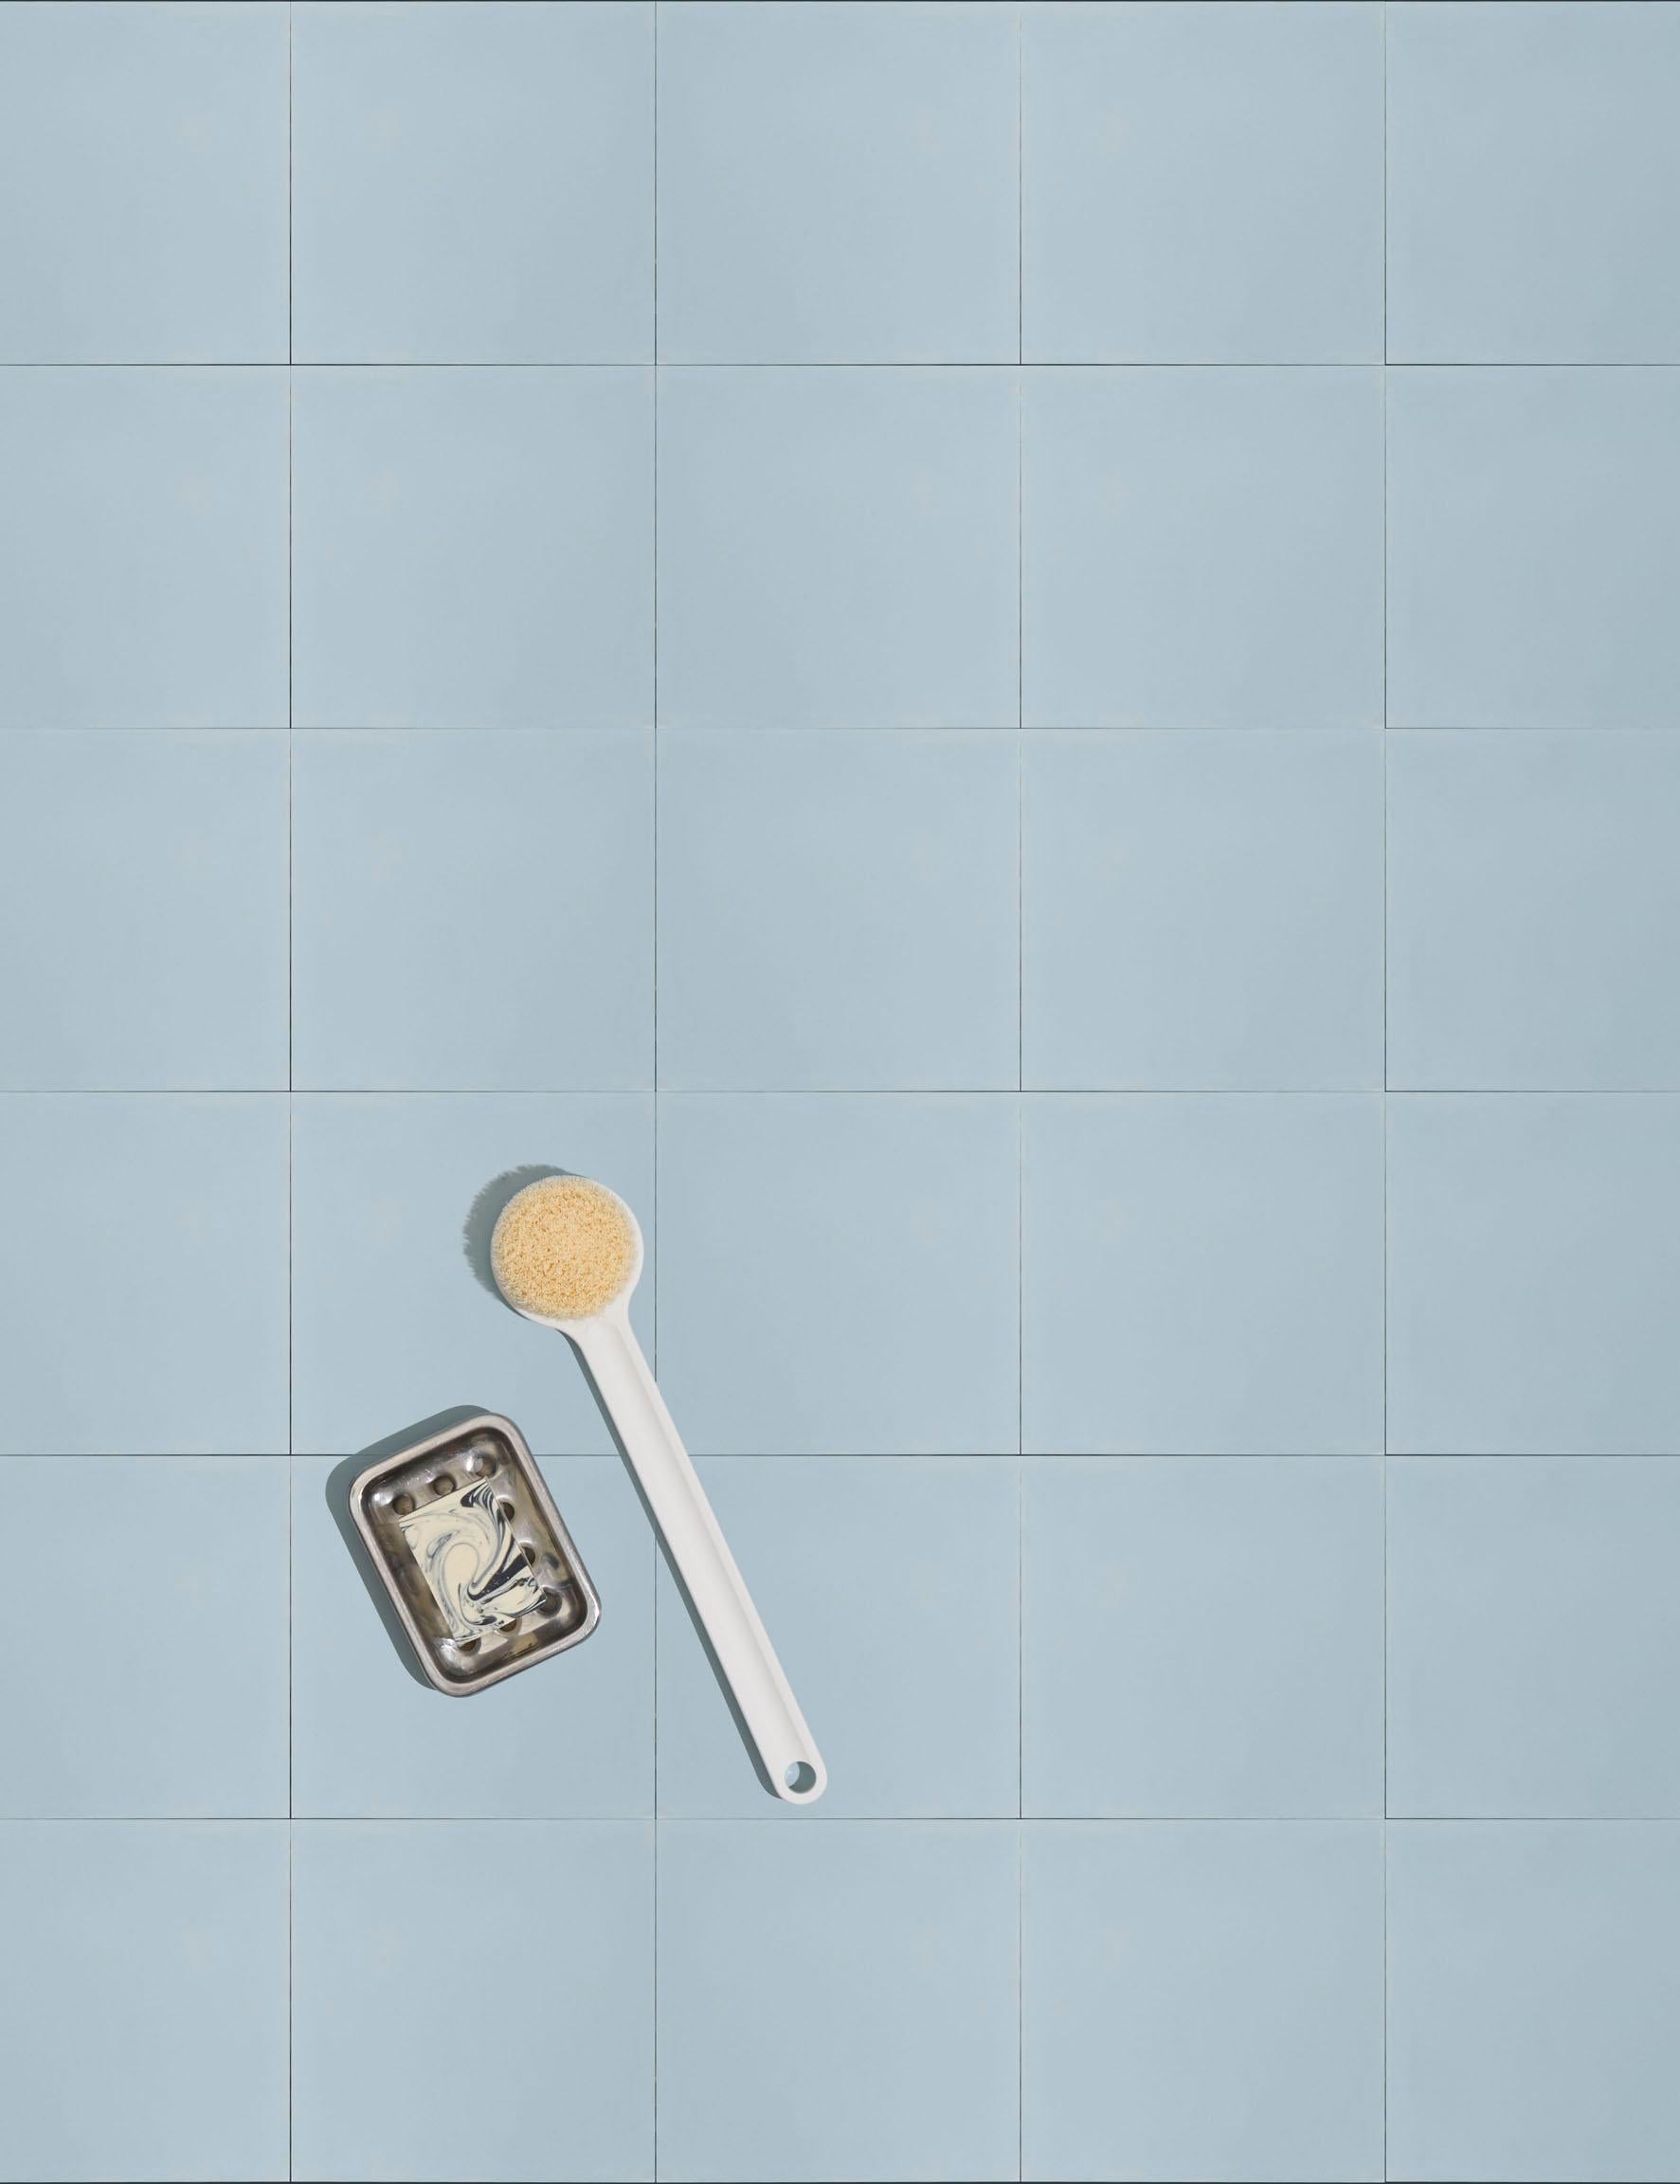 Available in our full palette in both cement and ceramic tile, these solid-shade square tiles can be coordinated with our patterned tiles for a perfectly calming mix.
Cement Tiles
Type: Encaustic cement tile
Production process: Hydraulic pressing